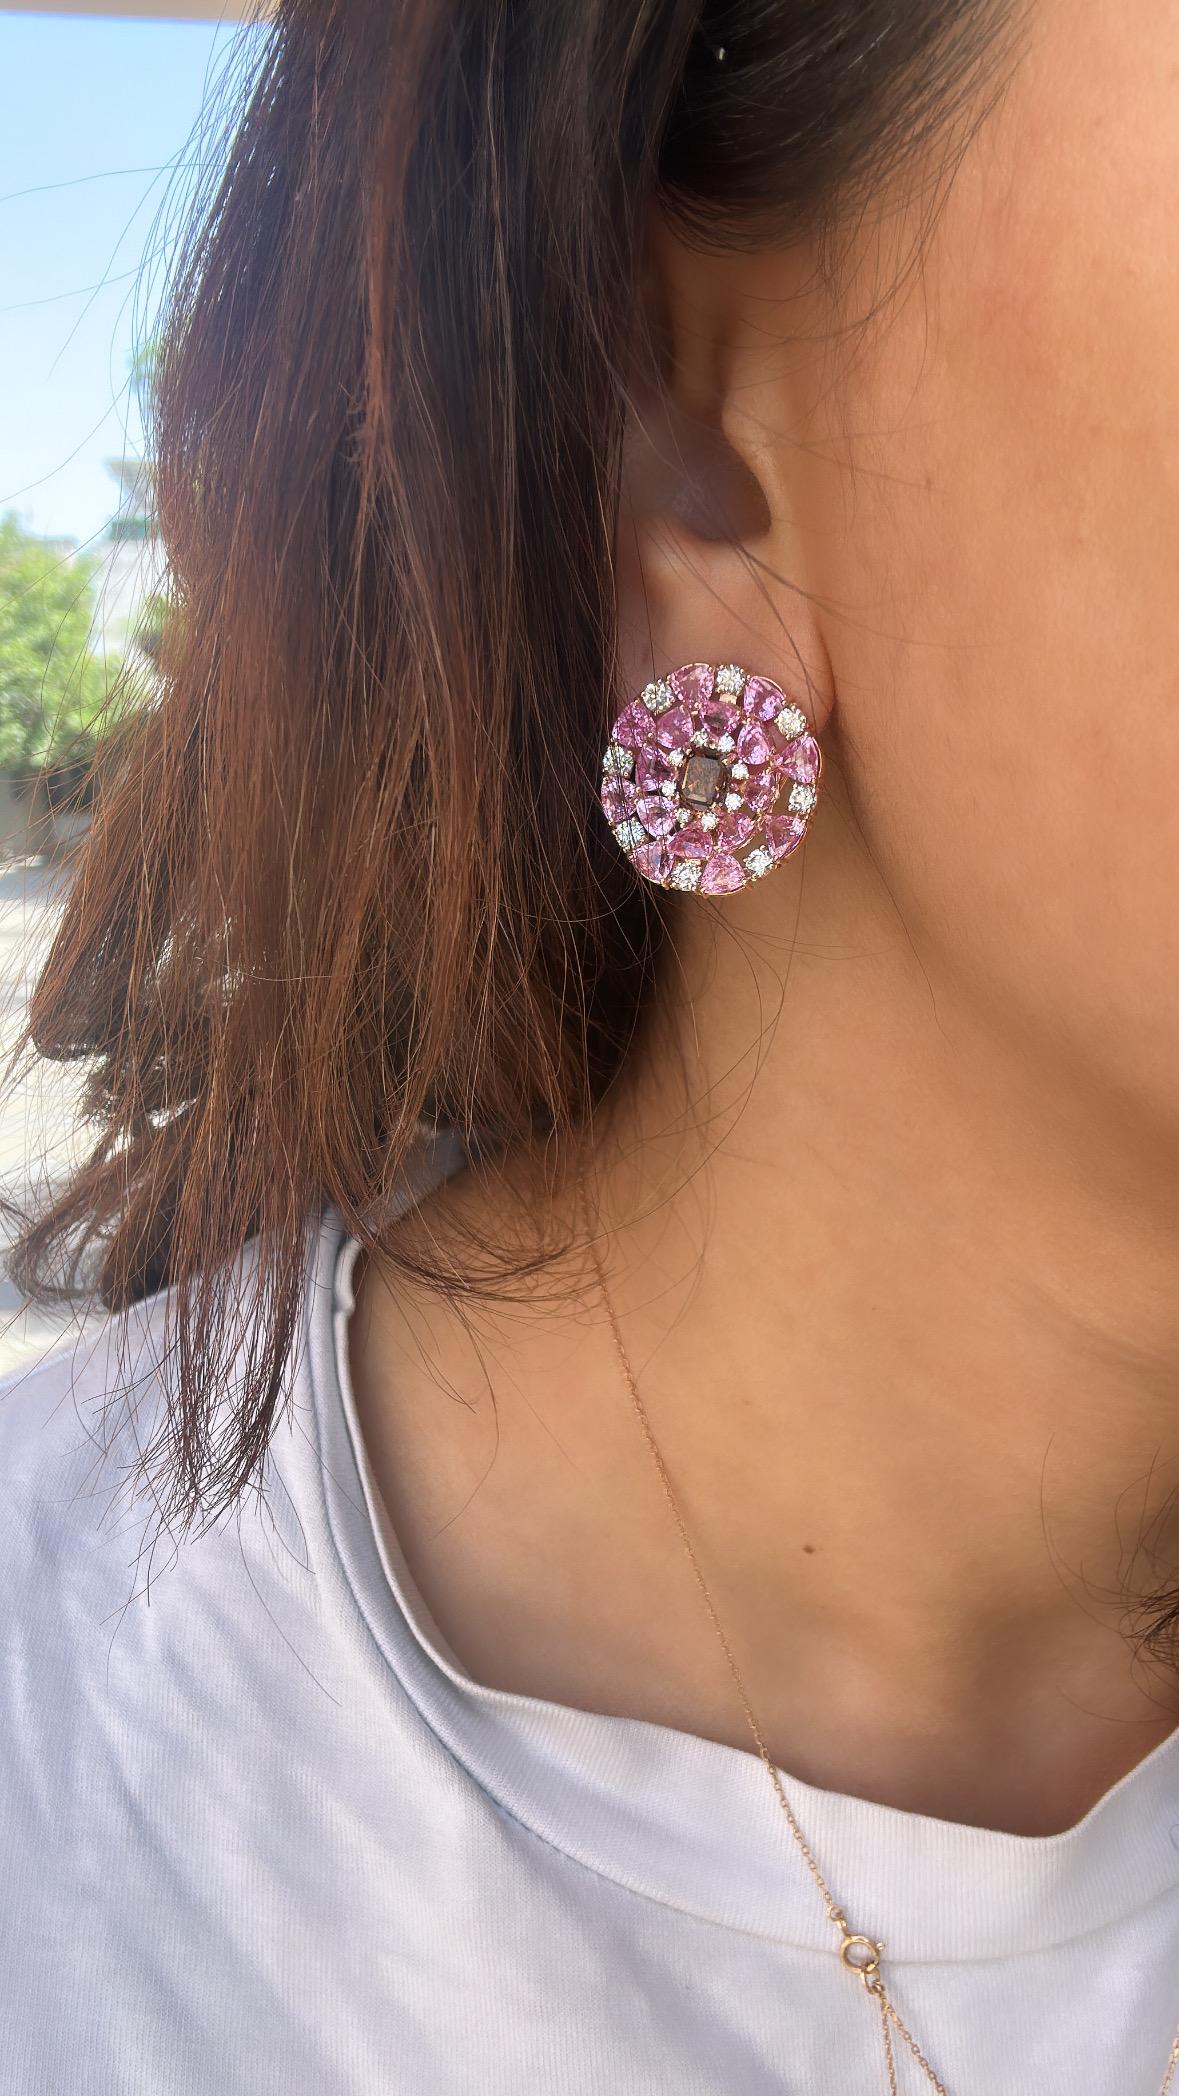 A very gorgeous and beautiful, Pink Sapphire Stud Earrings set in 18K Rose Gold & Diamonds. The weight of the Pink Sapphires is 8.96 carats. The Pink Sapphires are of Ceylon (Sri Lankan) origin. The combined weight of the Diamonds is 3.18 carats.